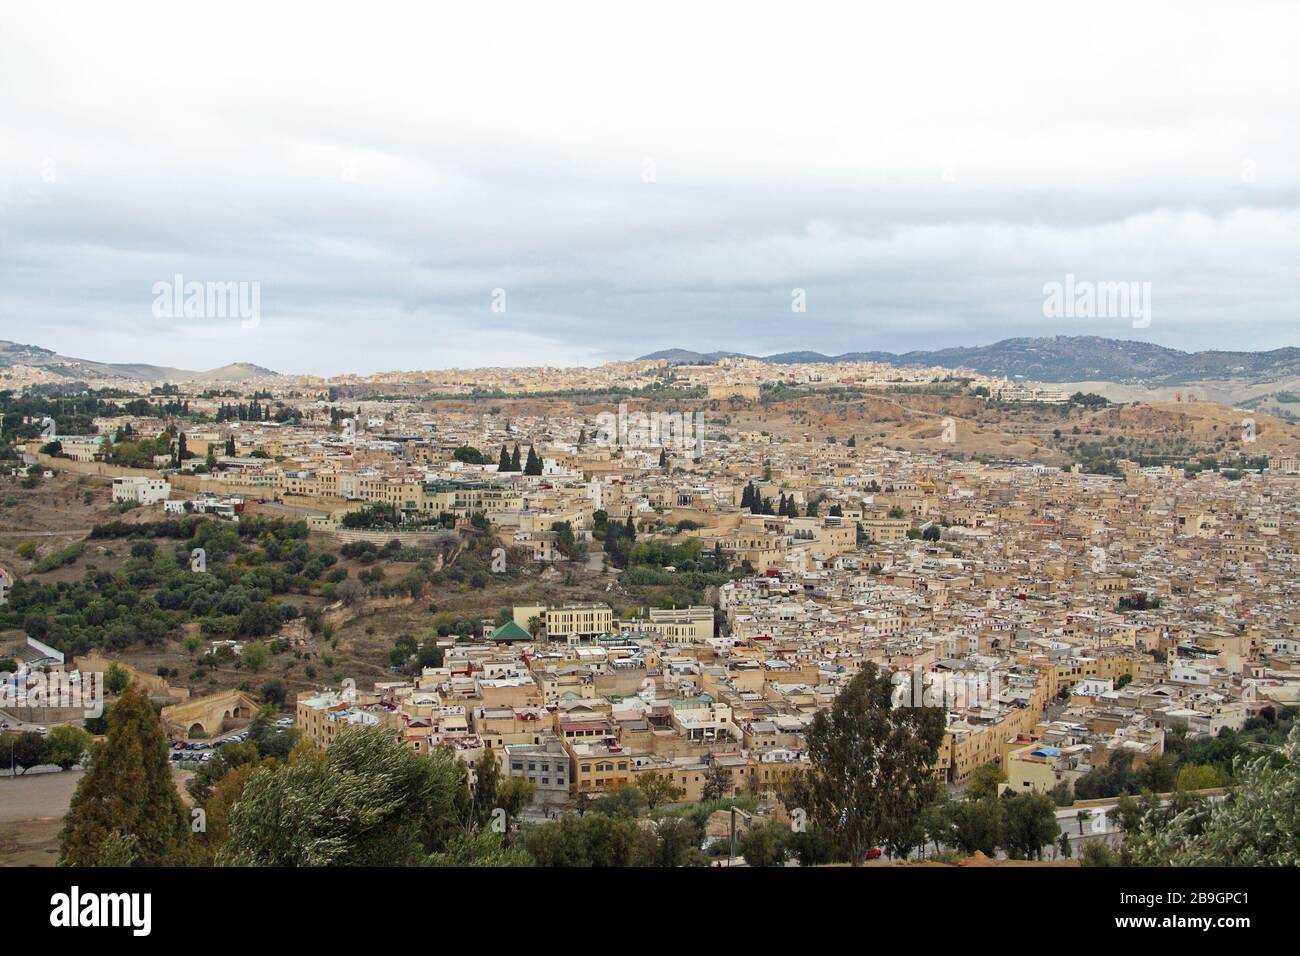 View over the medina (old city) of Fes (Fez), Morocco Stock Photo